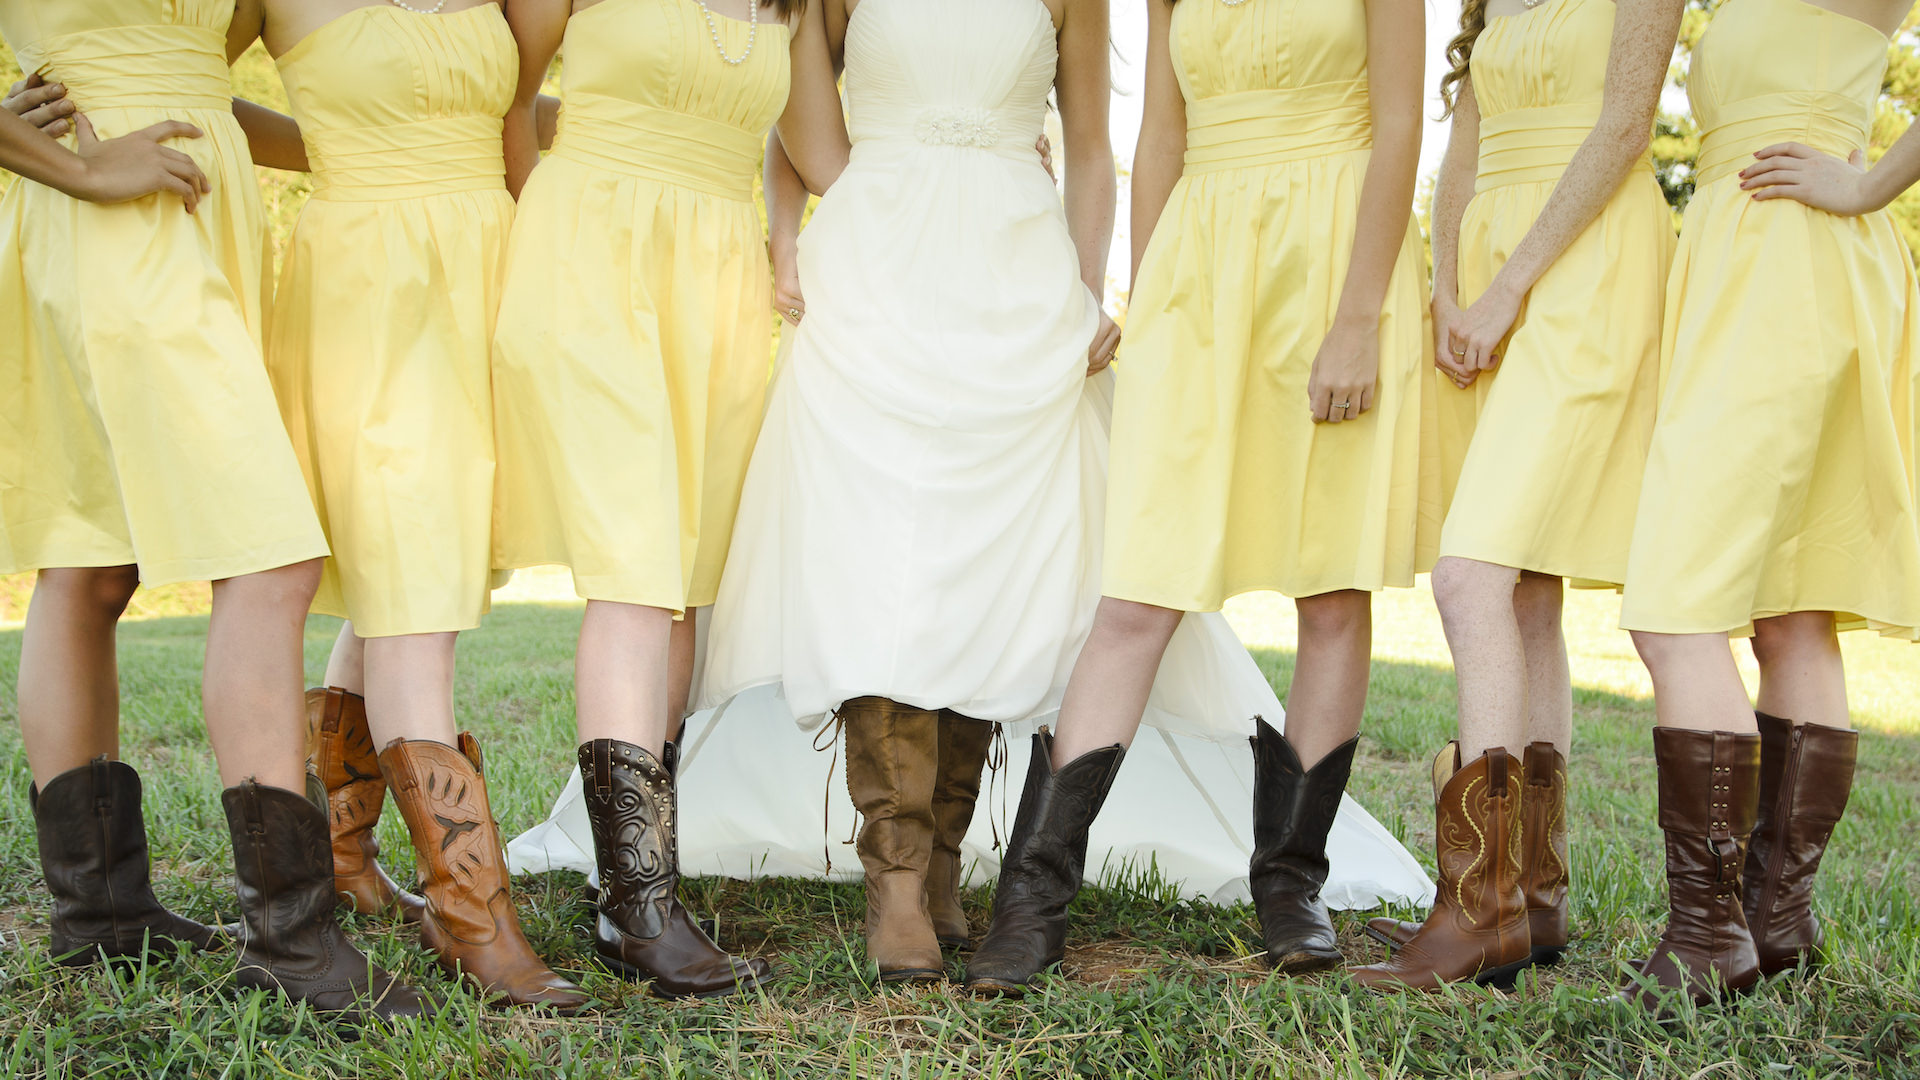 Bride and Bridesmaids show off their boots at a country wedding.